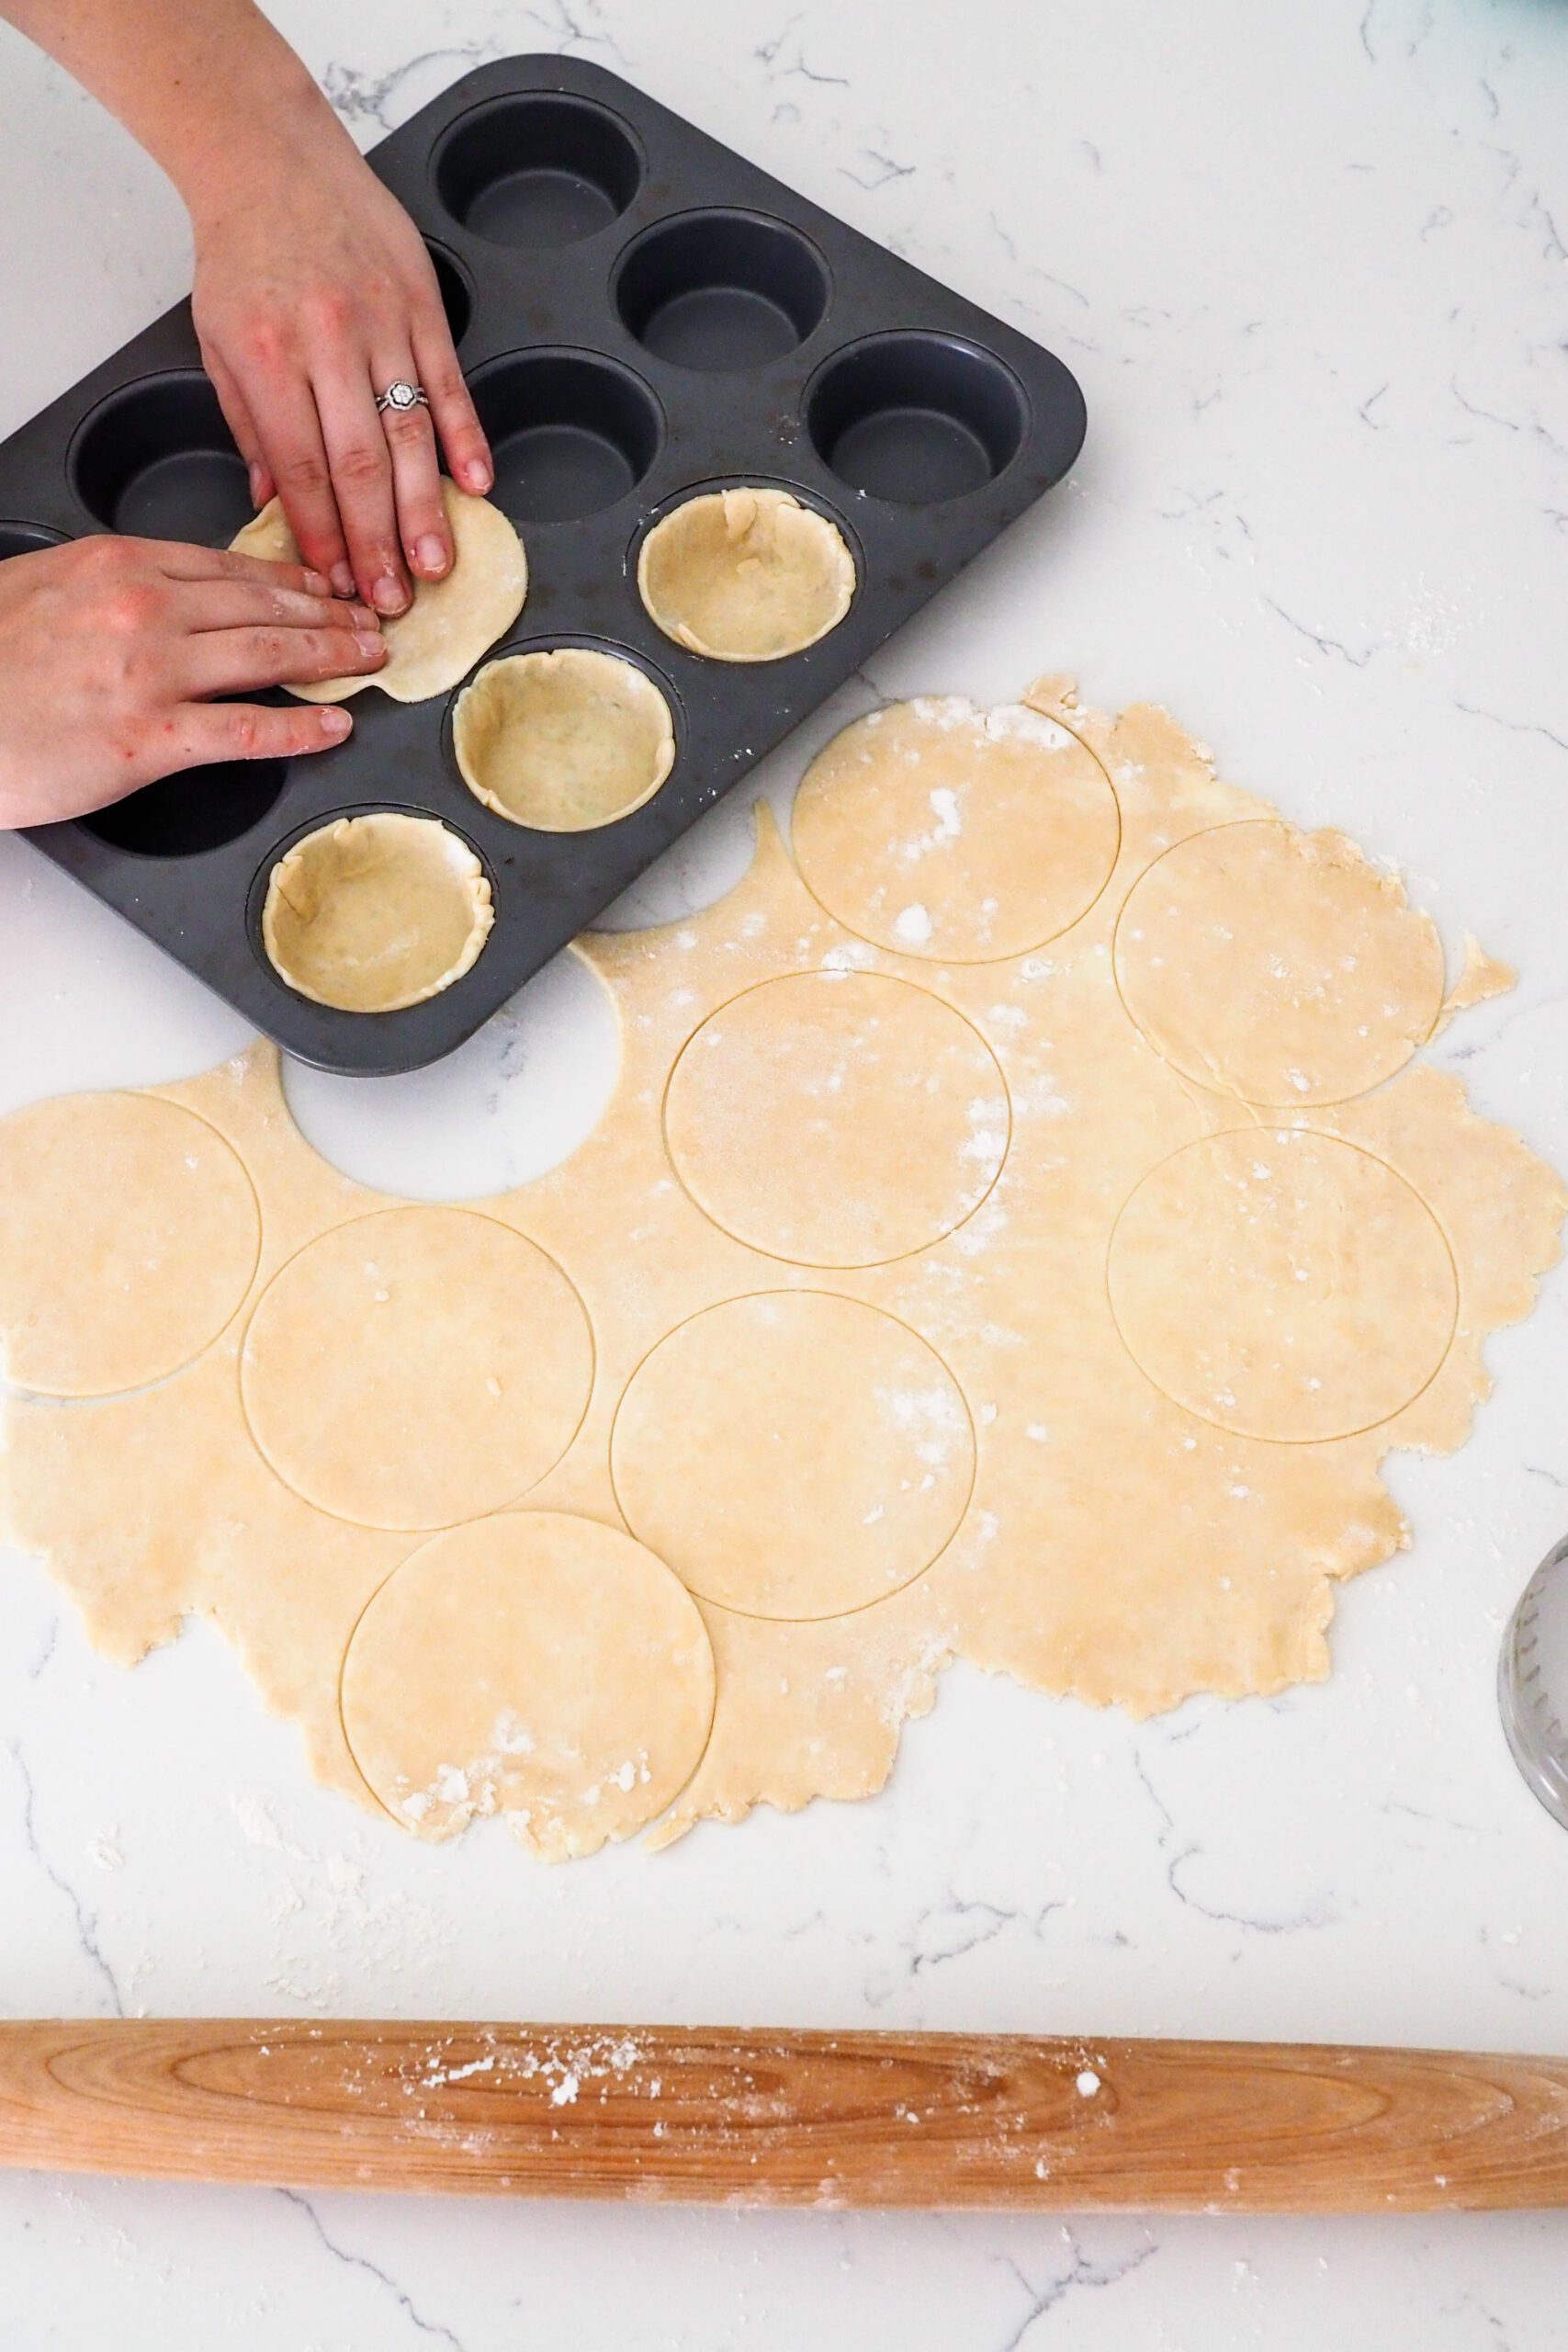 Two hands guide a circle of pie dough into a muffin pan opening.